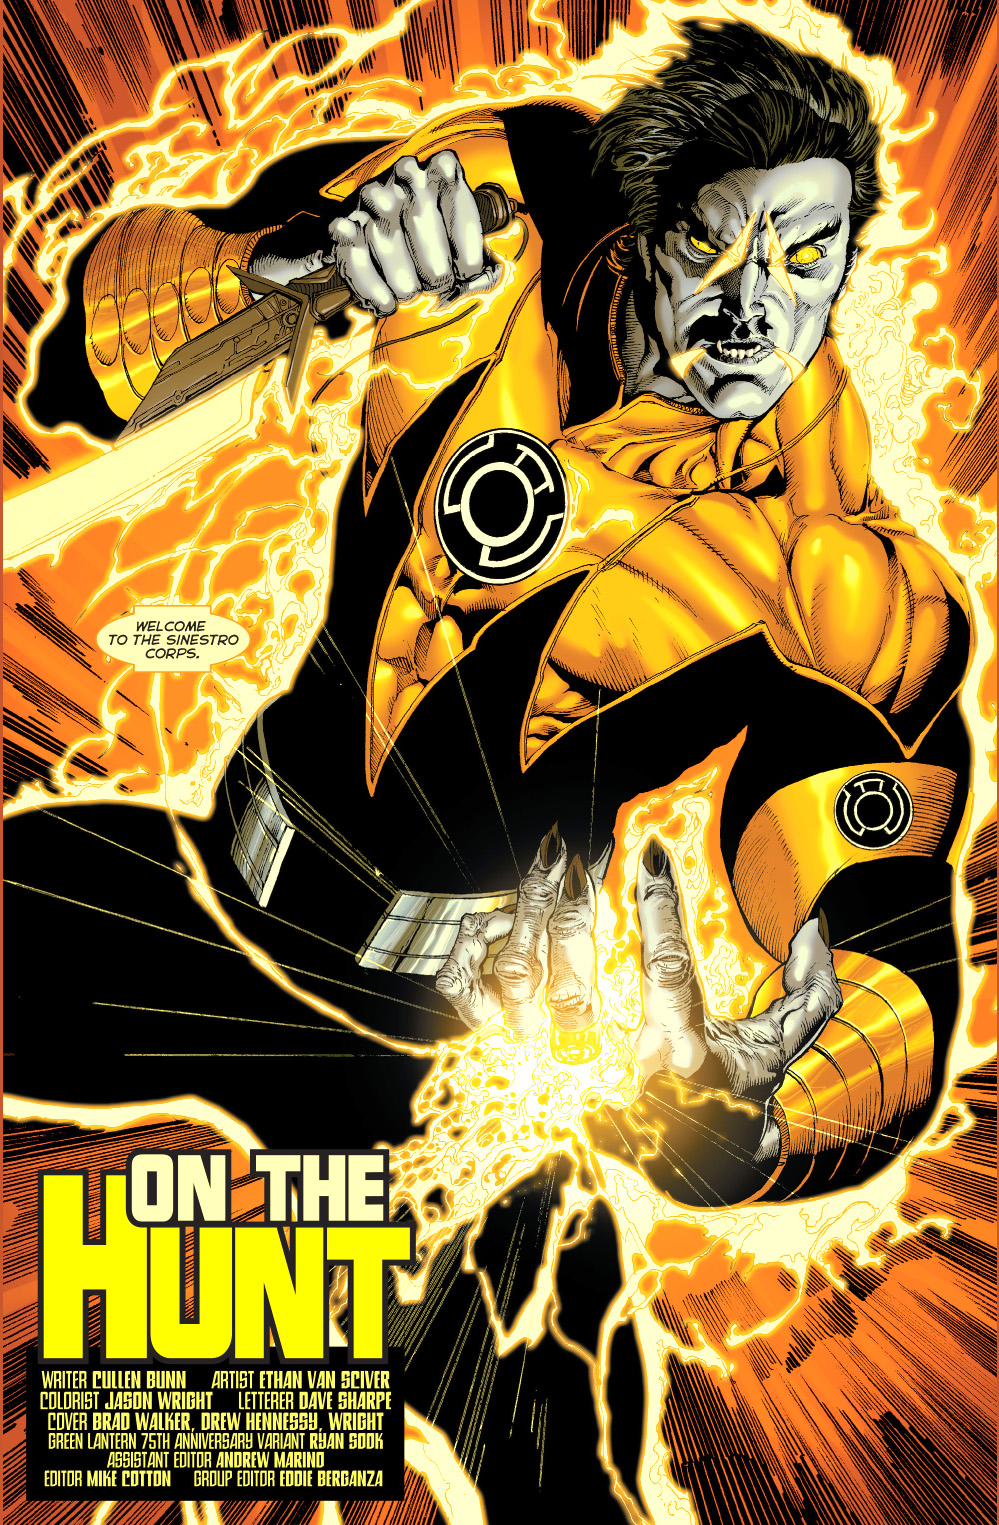 lobo is chosen by a sinestro corps ring